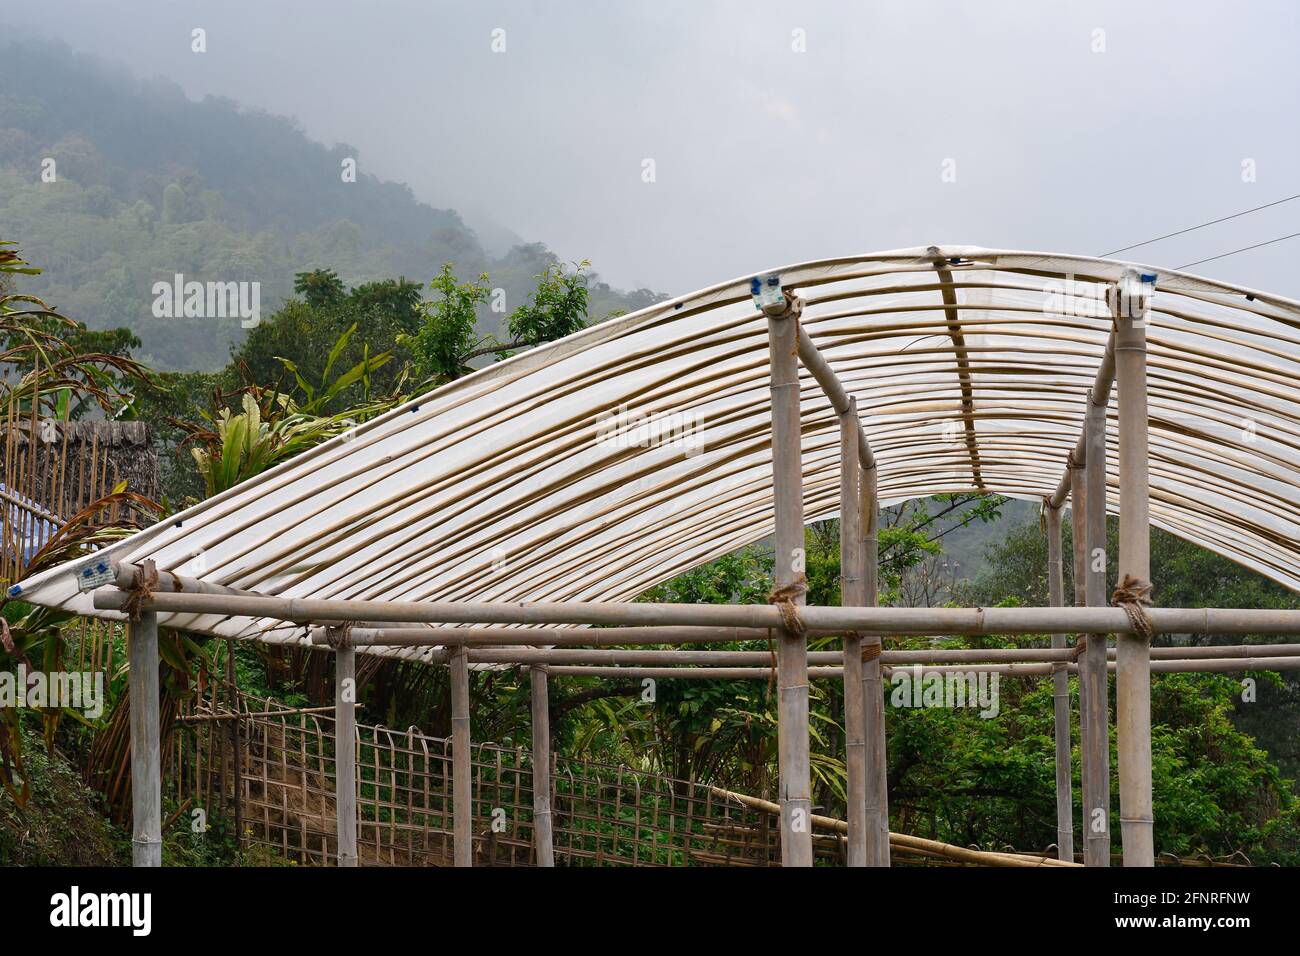 Greenhouse structure, with walls and roof made of transparent Plastic material, Provide plants regulated climatic conditions. Stock Photo